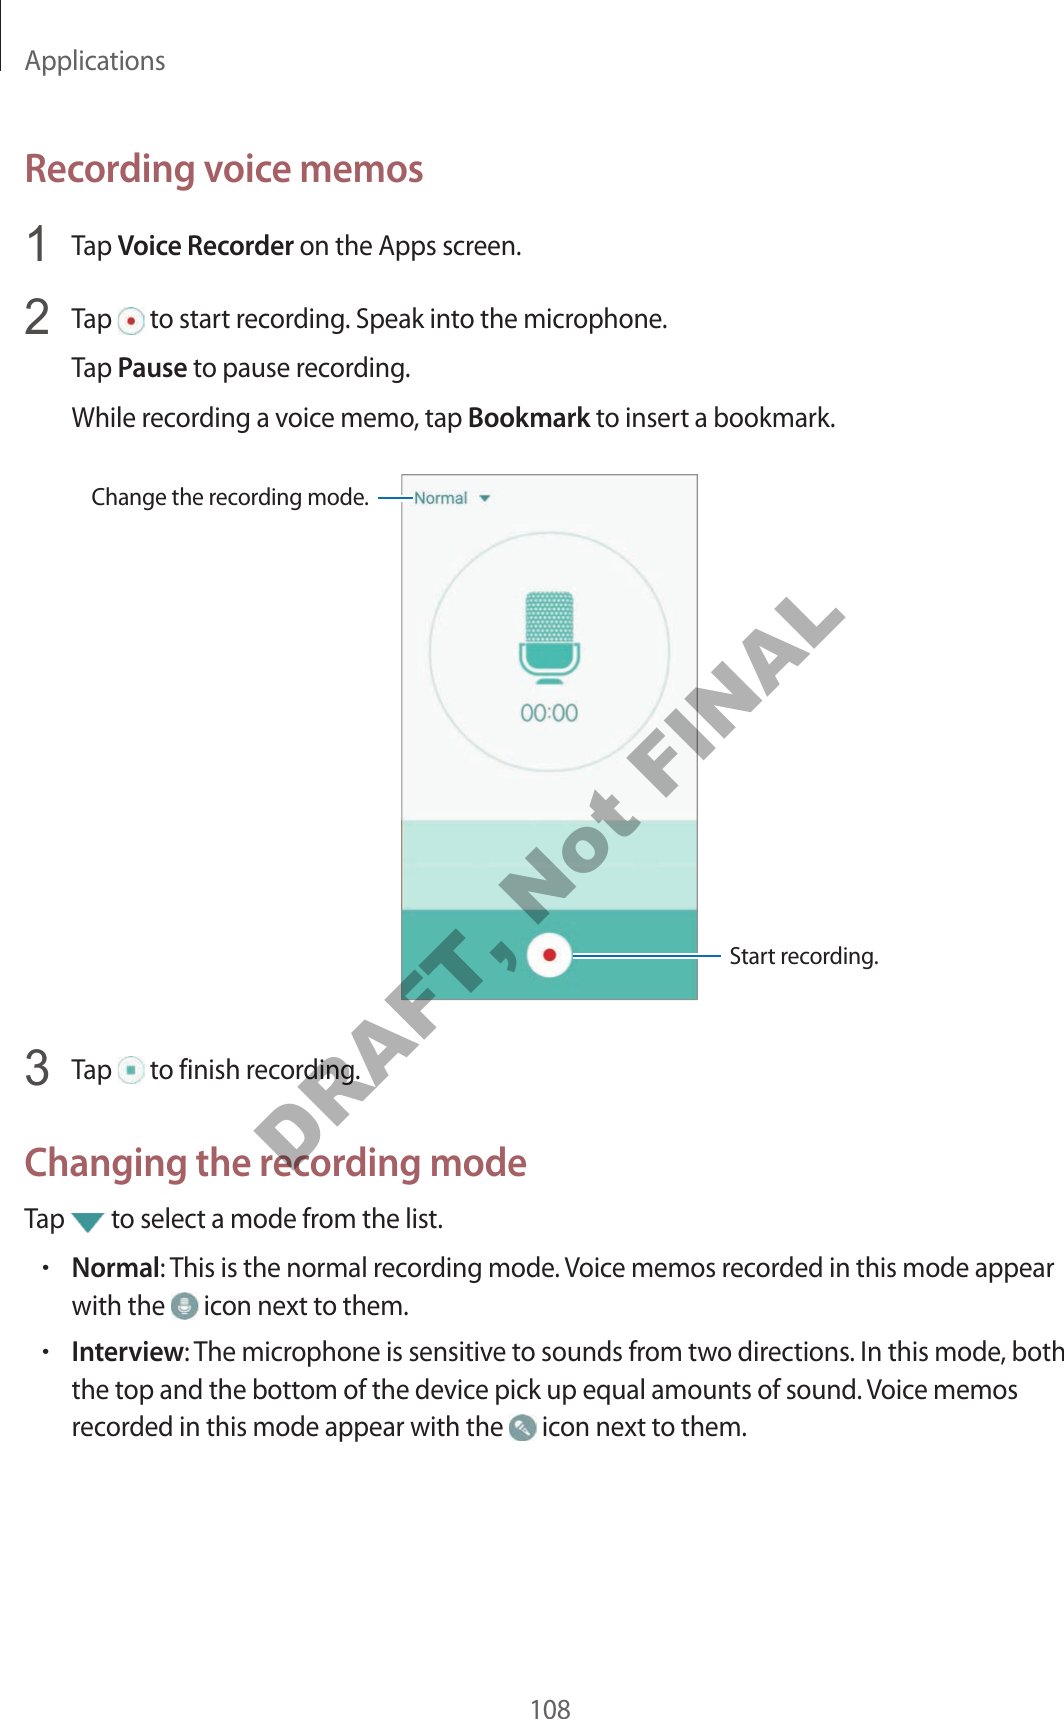 Applications108Recor ding v oic e memos1  Tap Voice Recor der on the Apps screen.2  Tap   to start recor ding . Speak in to the micr ophone .Tap Pause to pause rec or ding .While rec or ding a v oice memo, tap Bookmark to insert a bookmark.Change the recor ding mode .Start rec or ding .3  Tap   to finish recor ding .Changing the r ec or ding modeTap   to select a mode from the list.•Normal: This is the normal rec or ding mode . Voice memos r ecor ded in this mode appearwith the   icon next to them.•Interview: The micr ophone is sensitiv e to sounds fr om two dir ections. In this mode, boththe top and the bottom of the devic e pick up equal amounts of sound . Voice memosrecor ded in this mode appear with the   icon next to them.DRAFT, Not FINAL